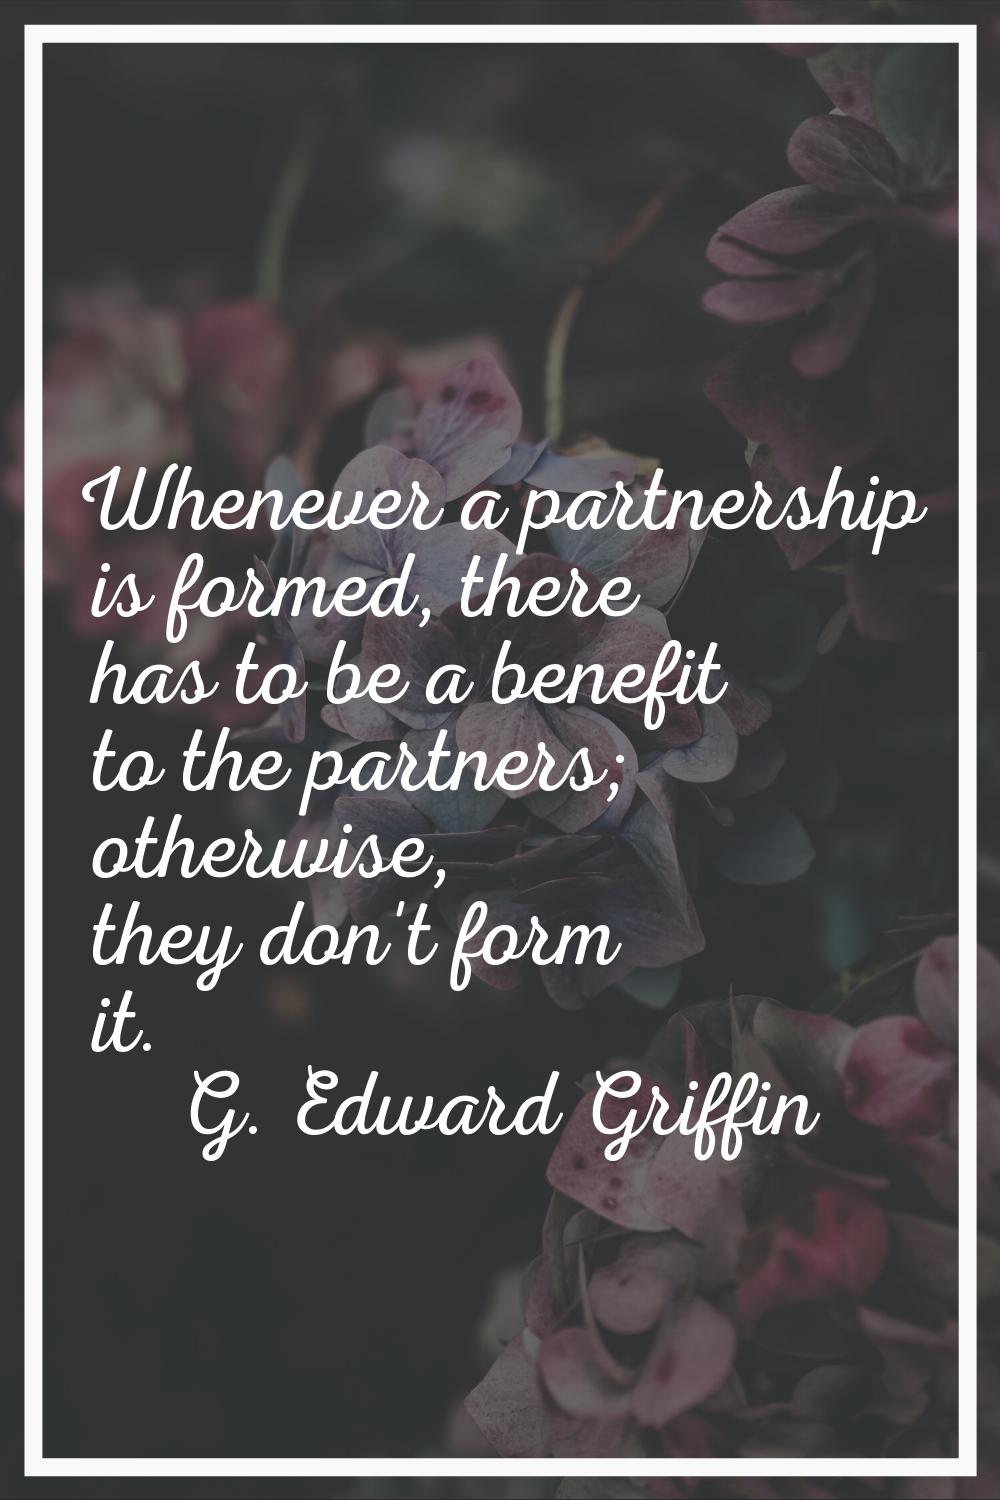 Whenever a partnership is formed, there has to be a benefit to the partners; otherwise, they don't 